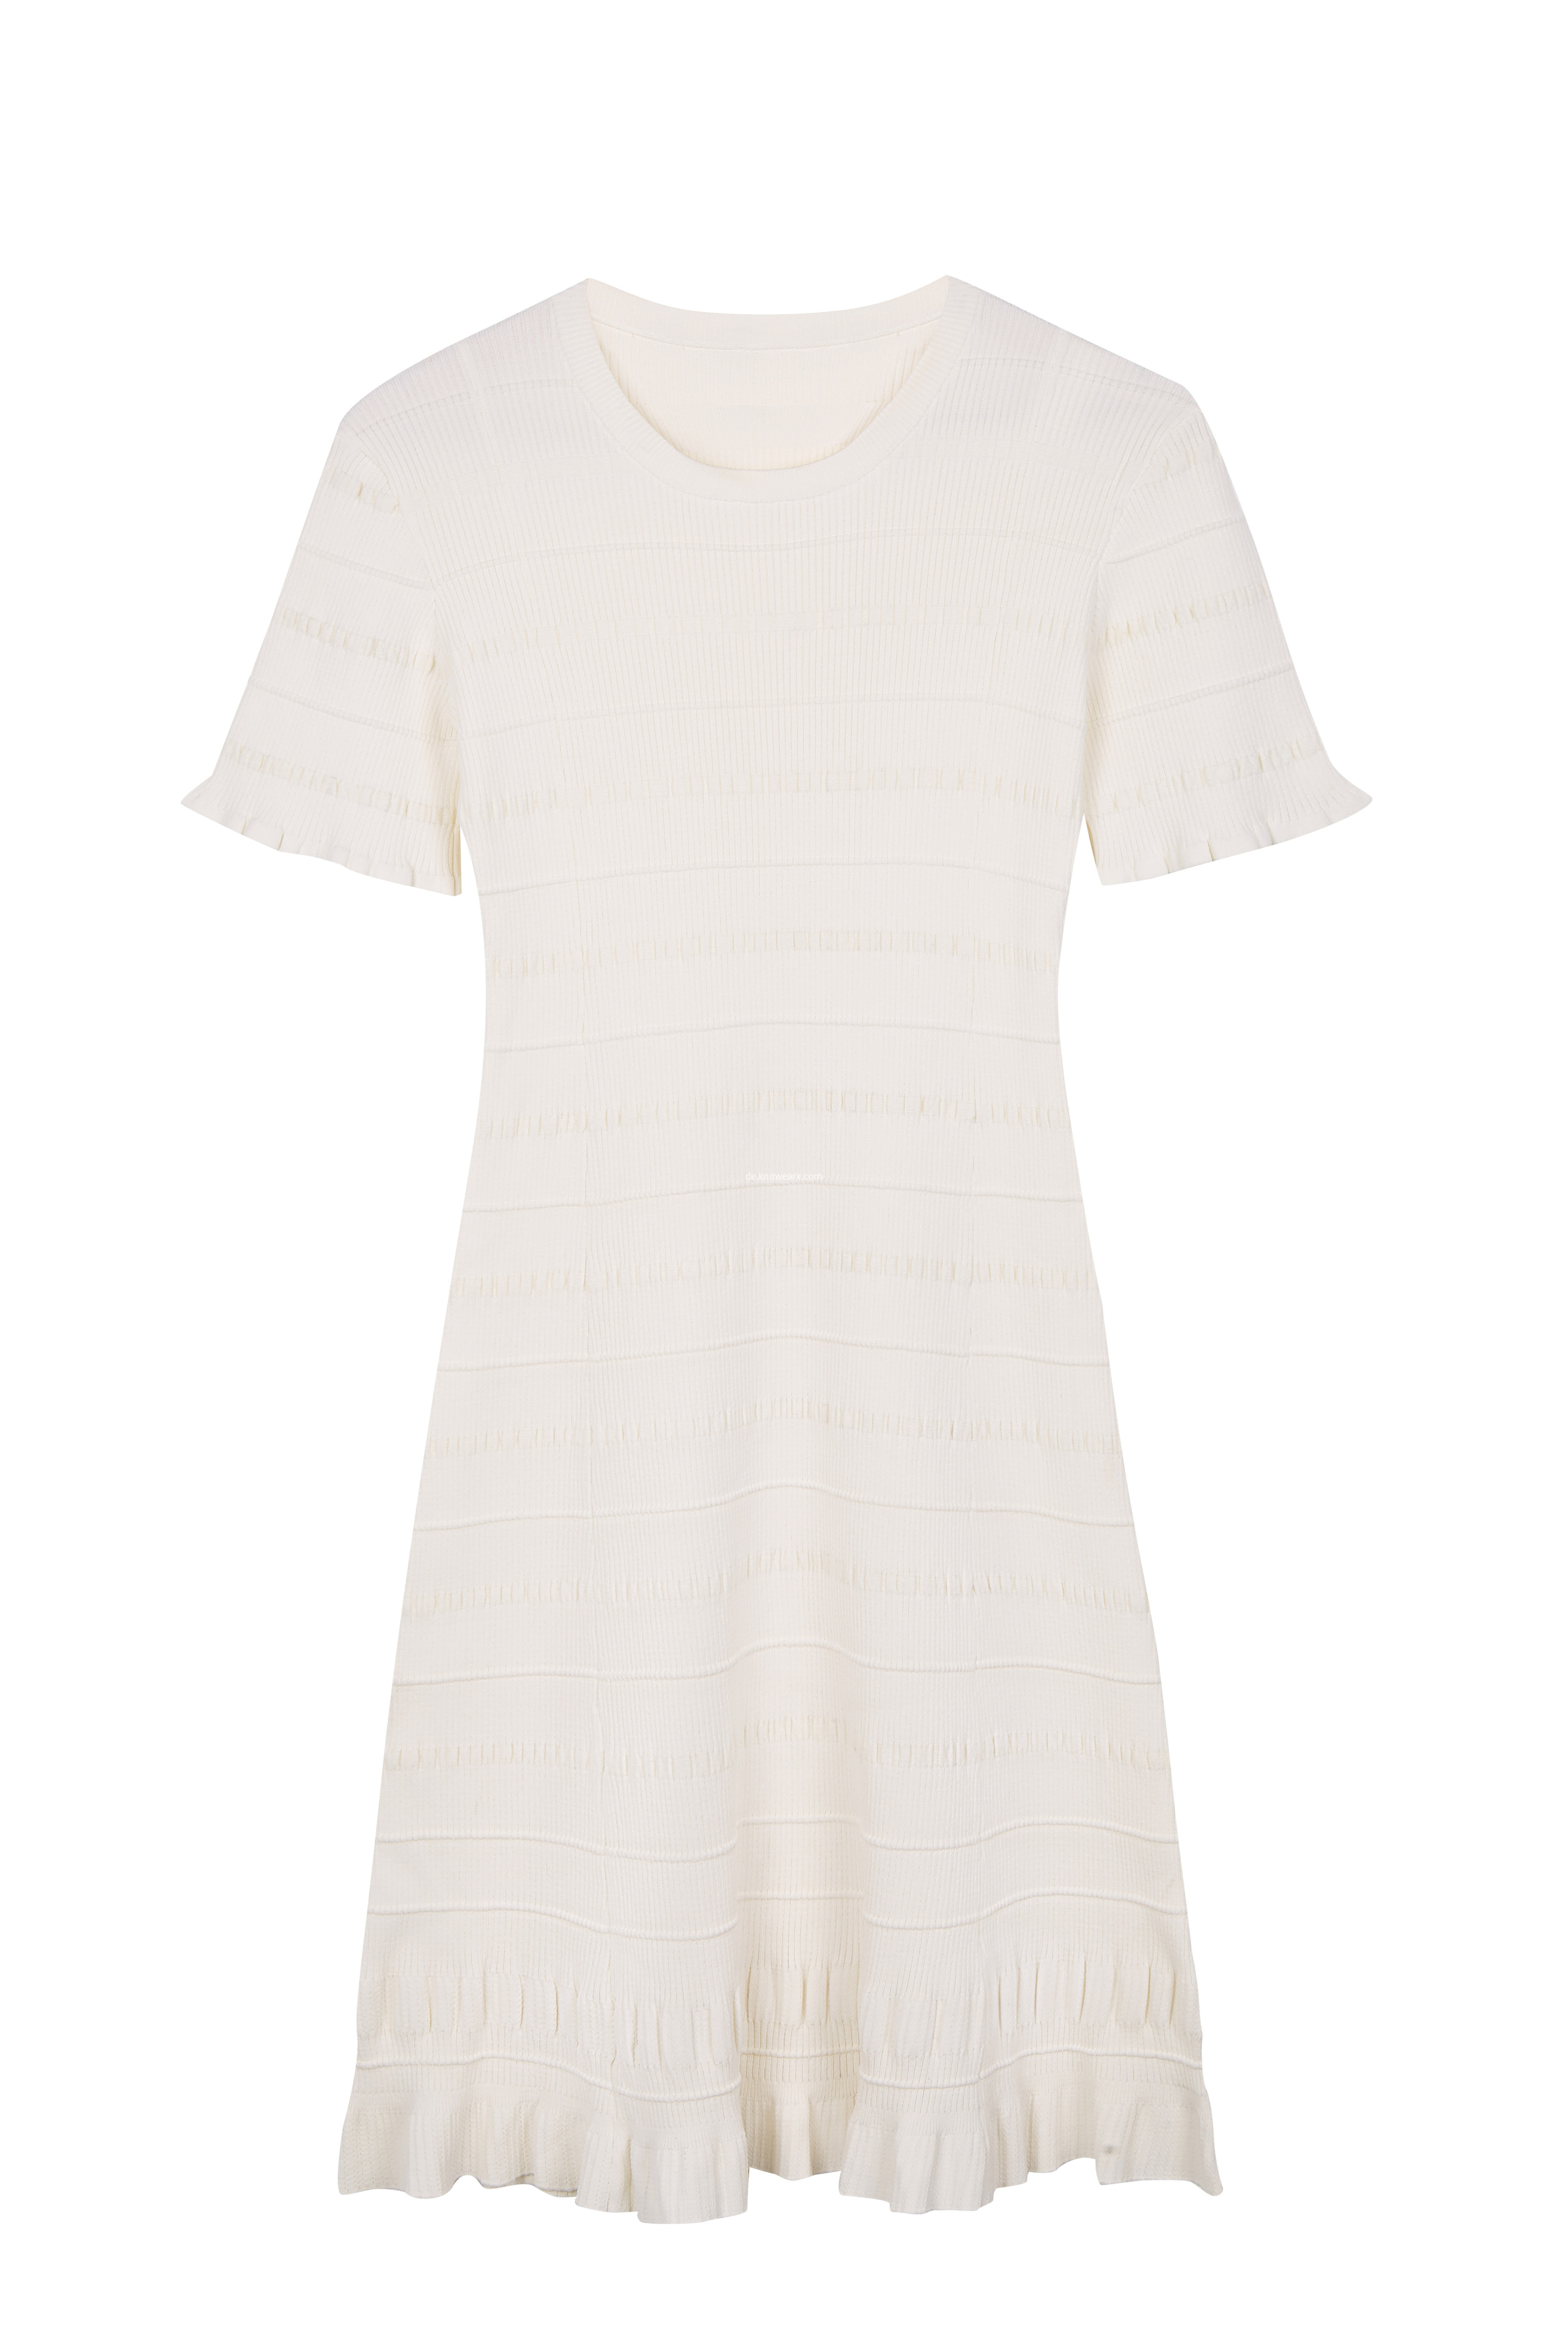 Women's Knitted Short Sleeve Stretchable Midi Dress